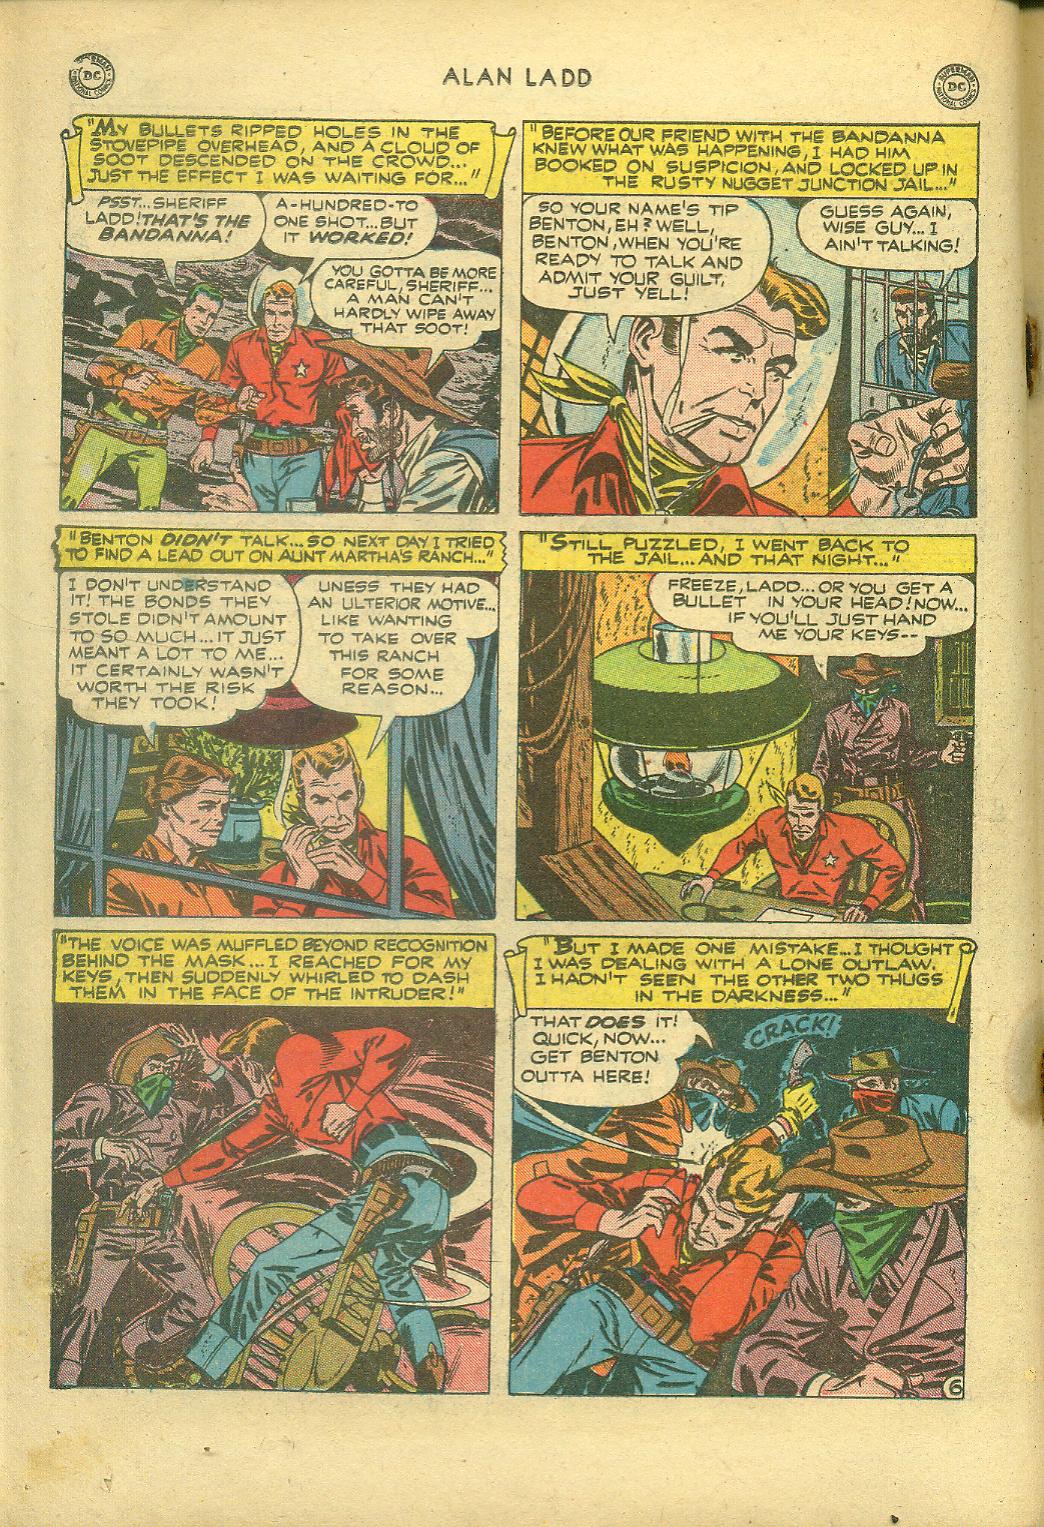 Read online Adventures of Alan Ladd comic -  Issue #2 - 26